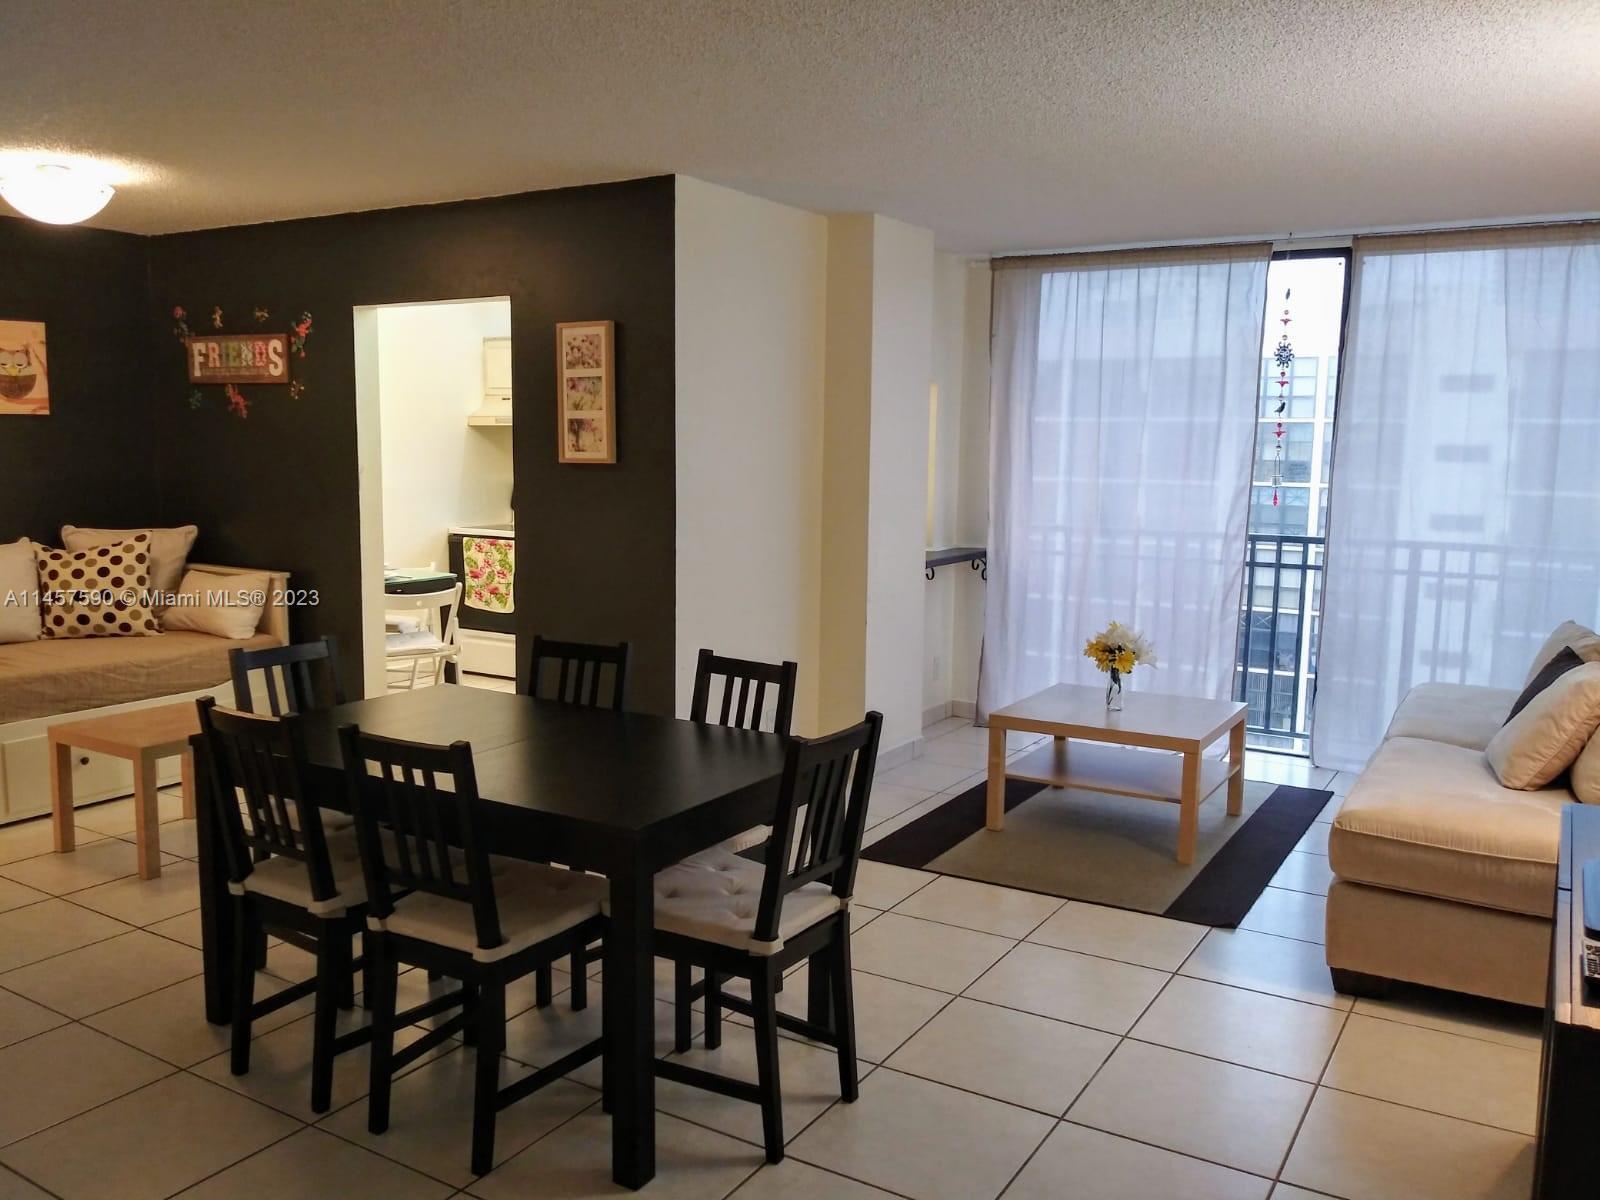 LOCATION!! SUNNY ISLES BEACH! 1 BED / 1.5 BATH. SPACIOUS L SHAPE LIVING ROOM. EAT IN KITCHEN. 9TH FL